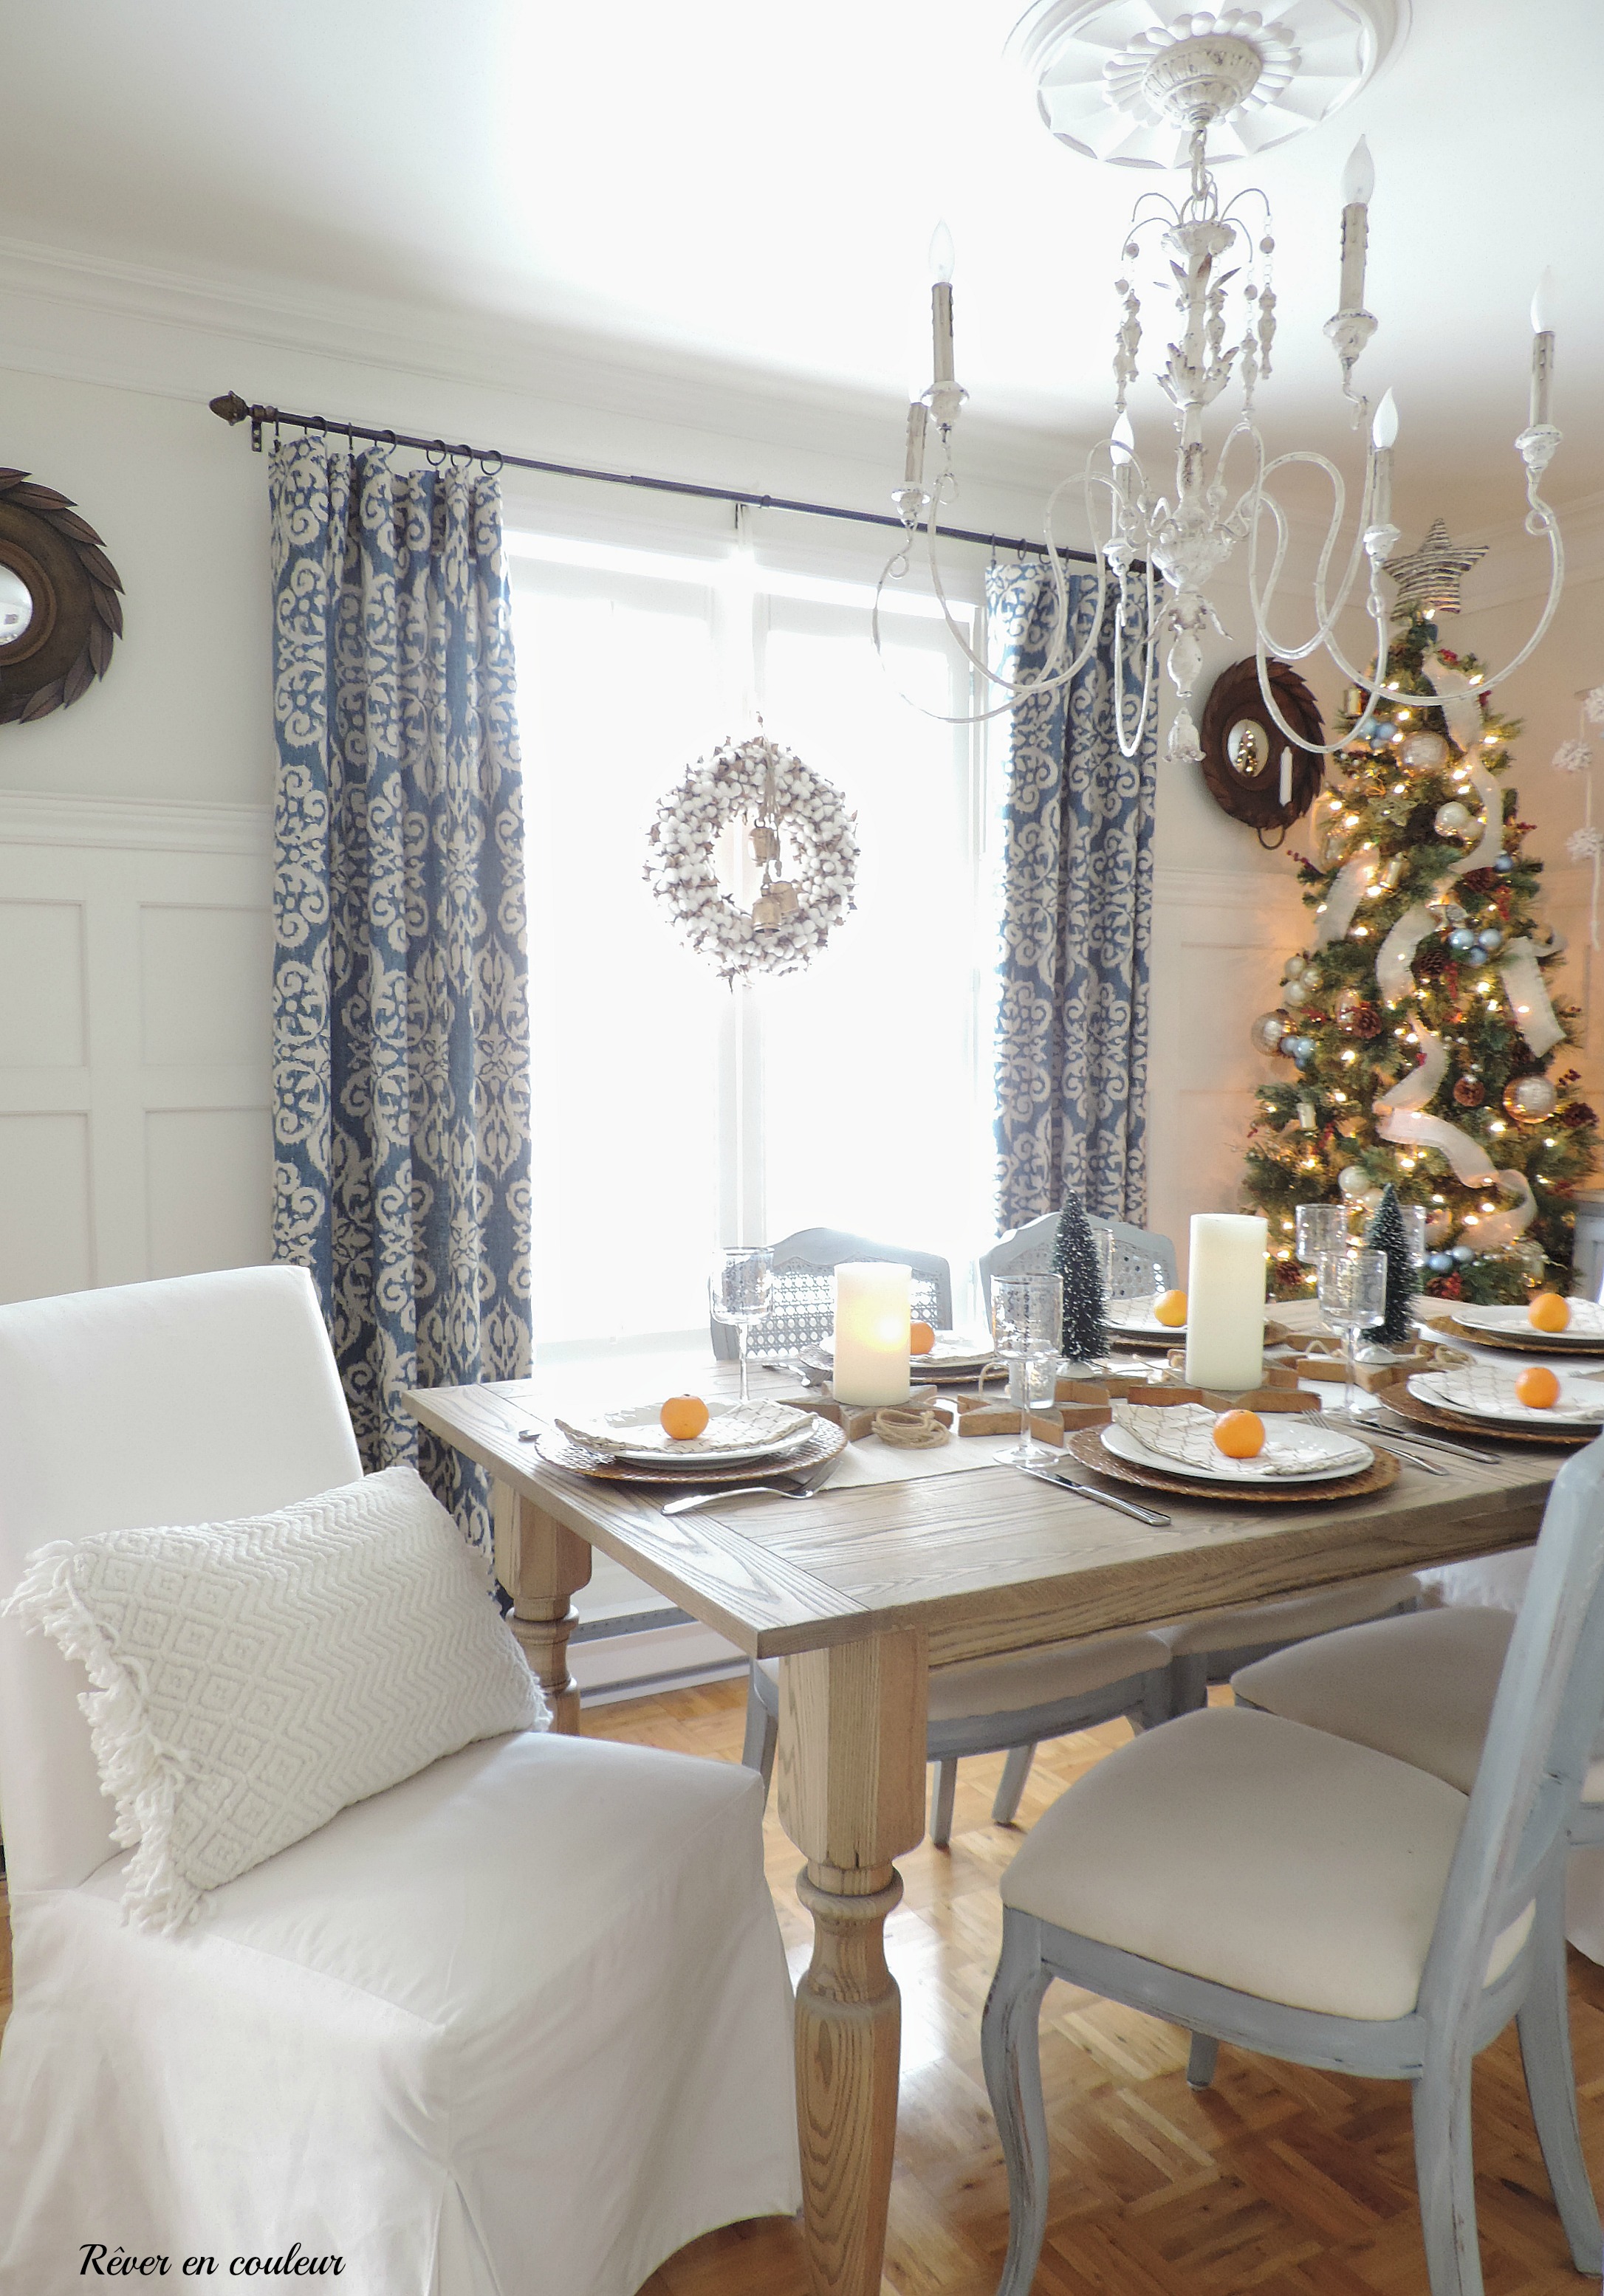 Christmas in the dining room